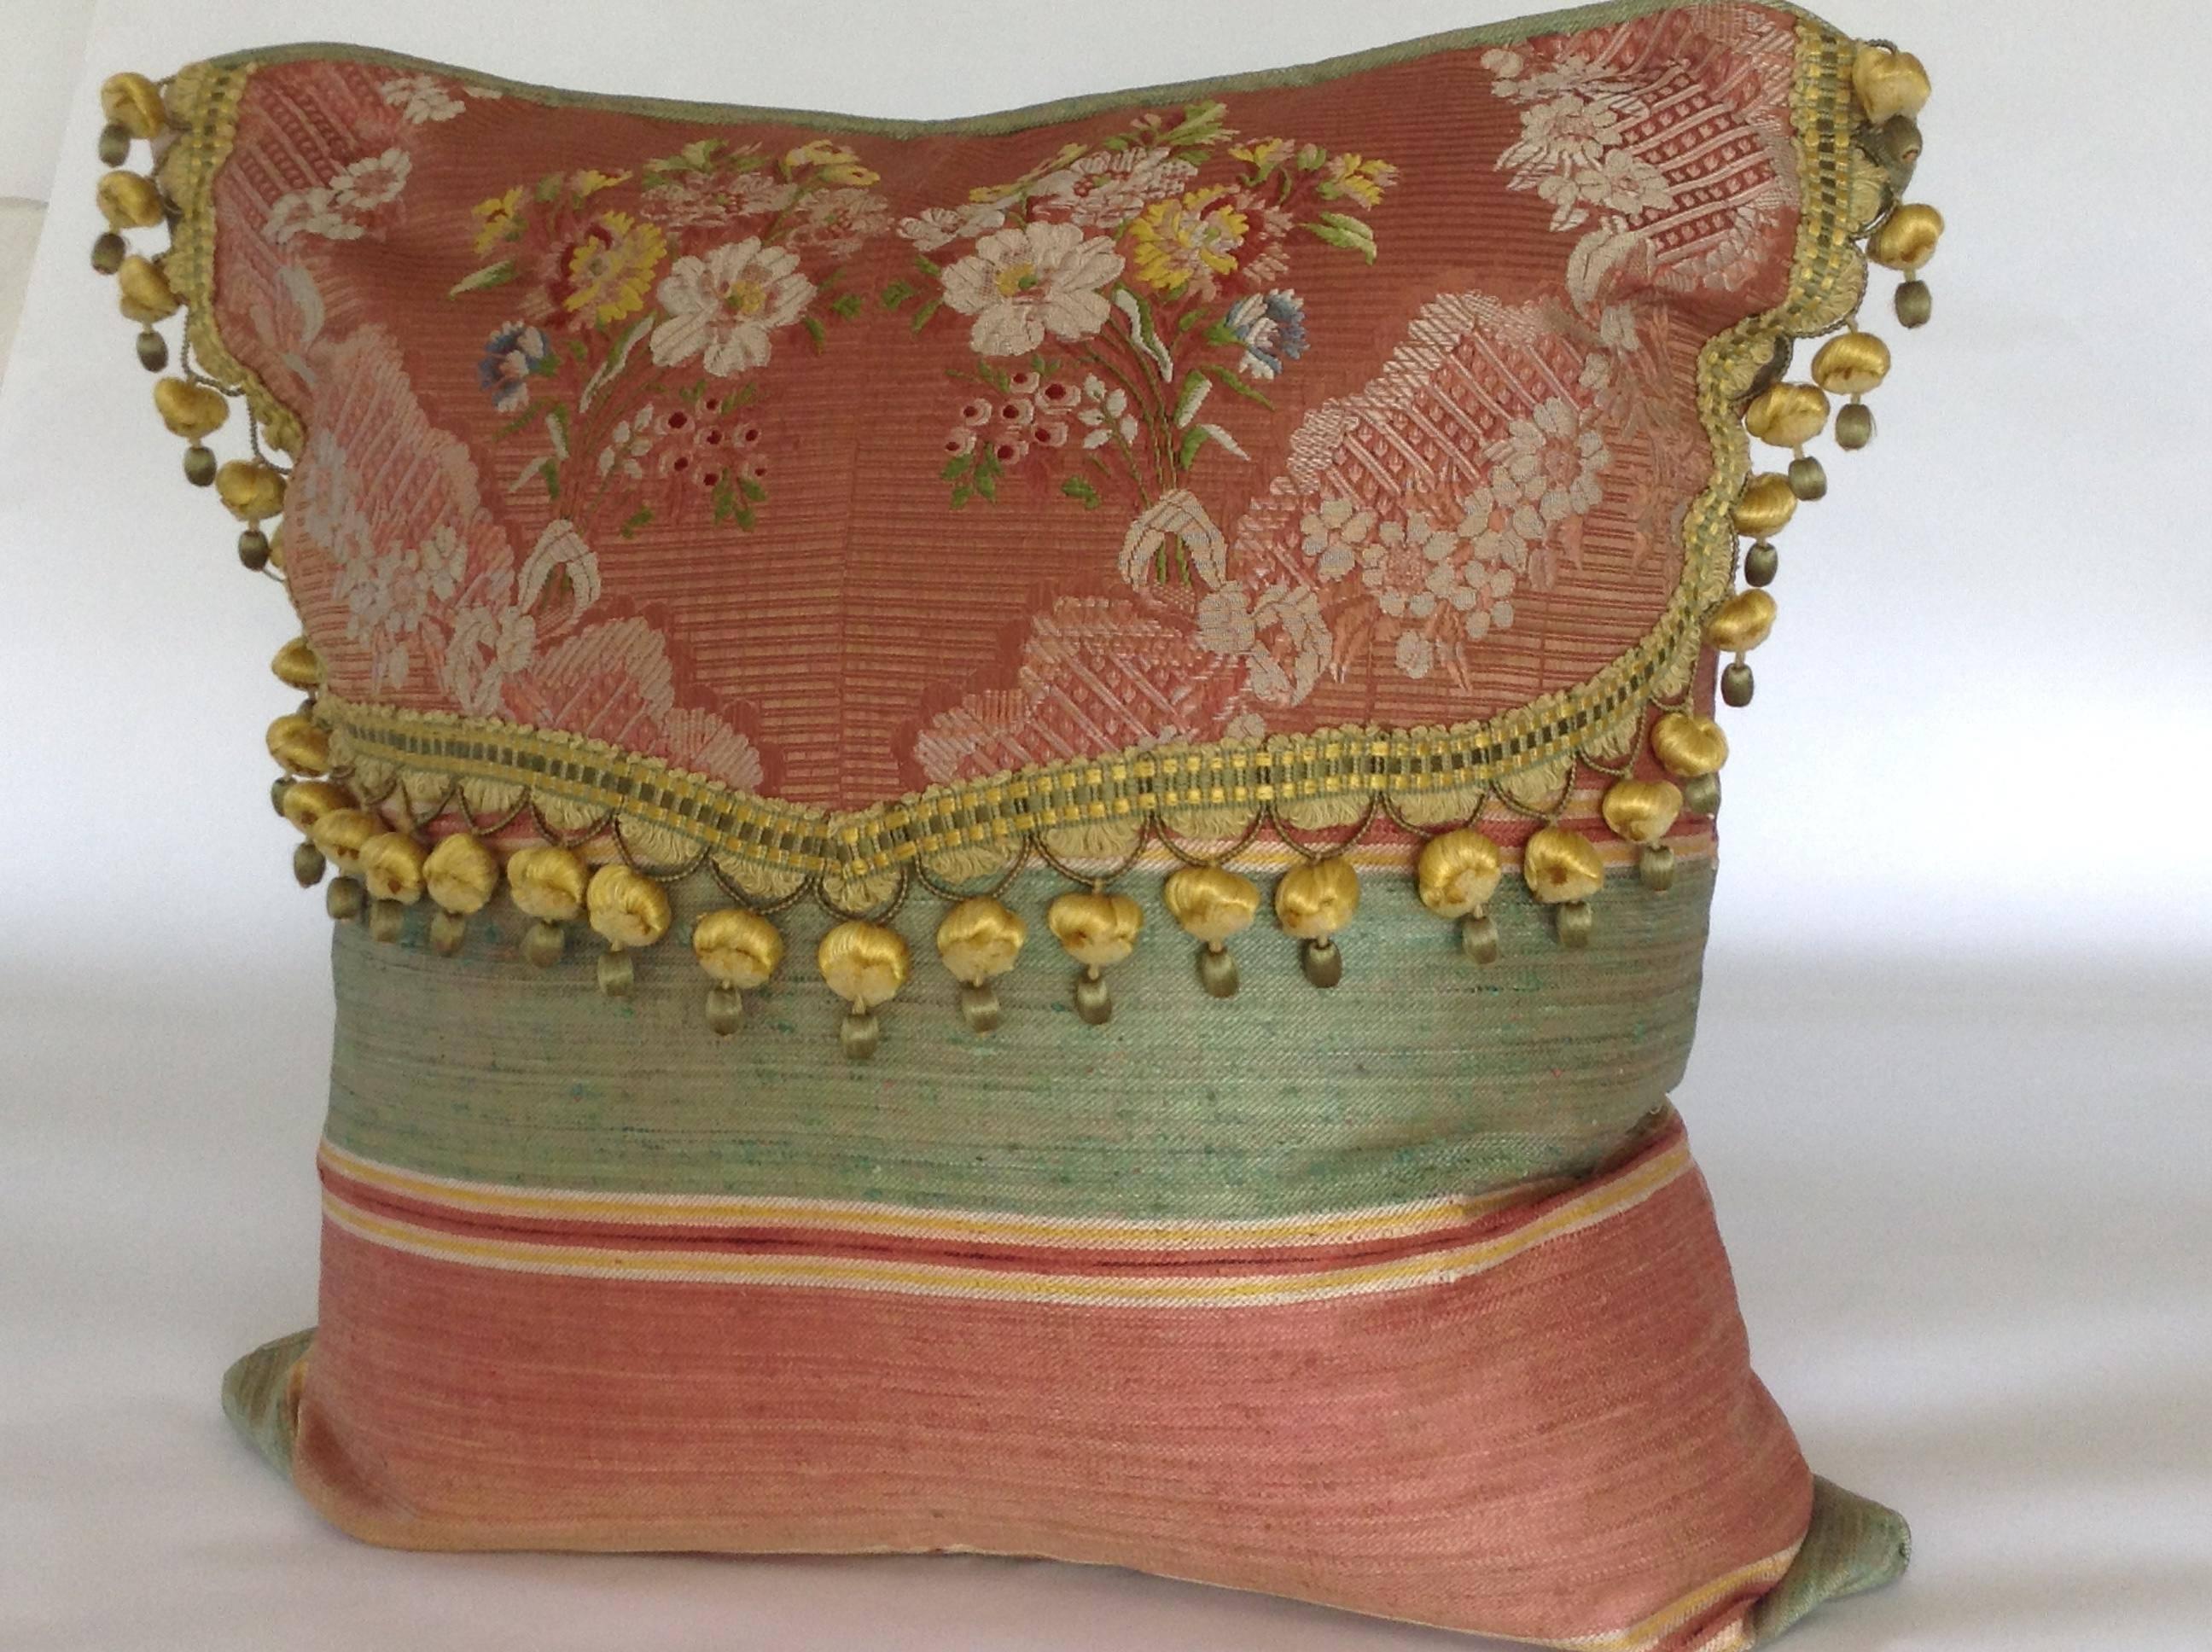 Hand-Crafted 18th Century French Silk Textile Pillow with Tassels